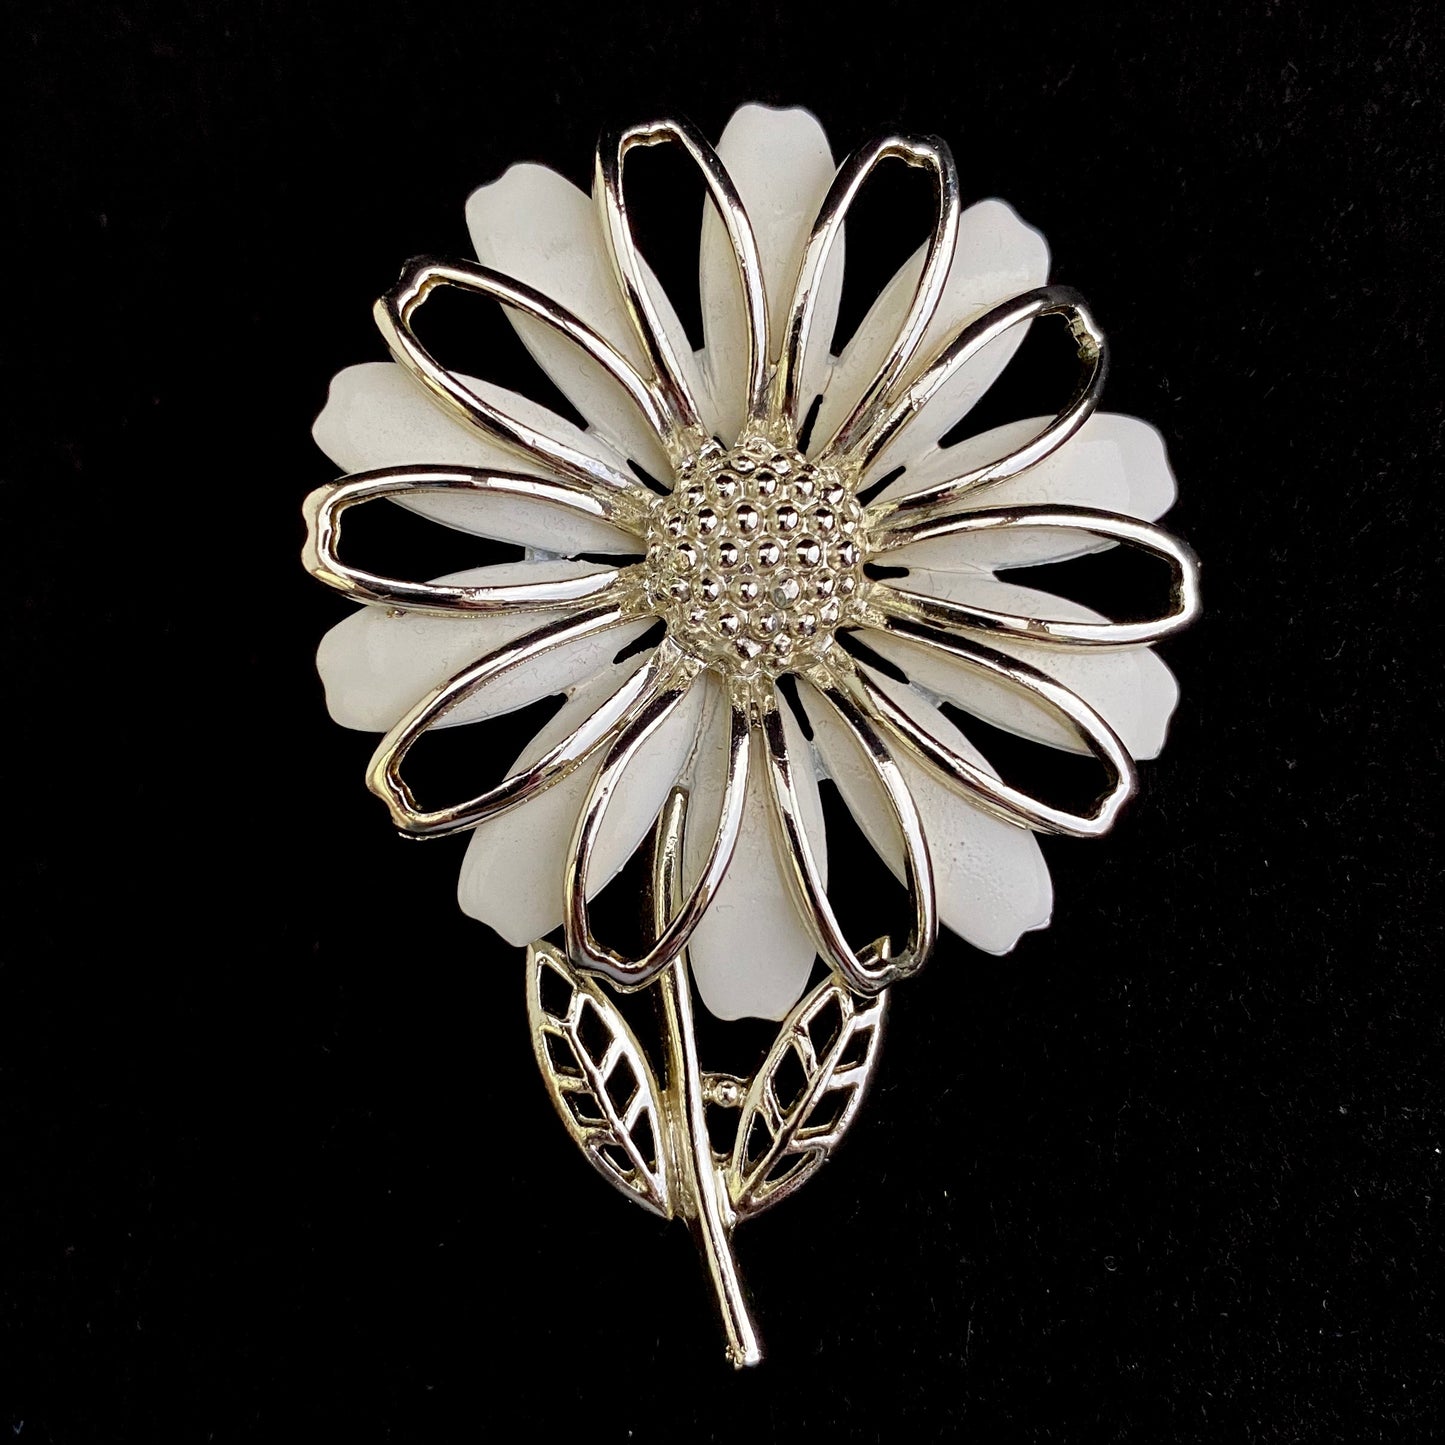 Late 60s / Early 70s Coro Flower Brooch - Retro Kandy Vintage